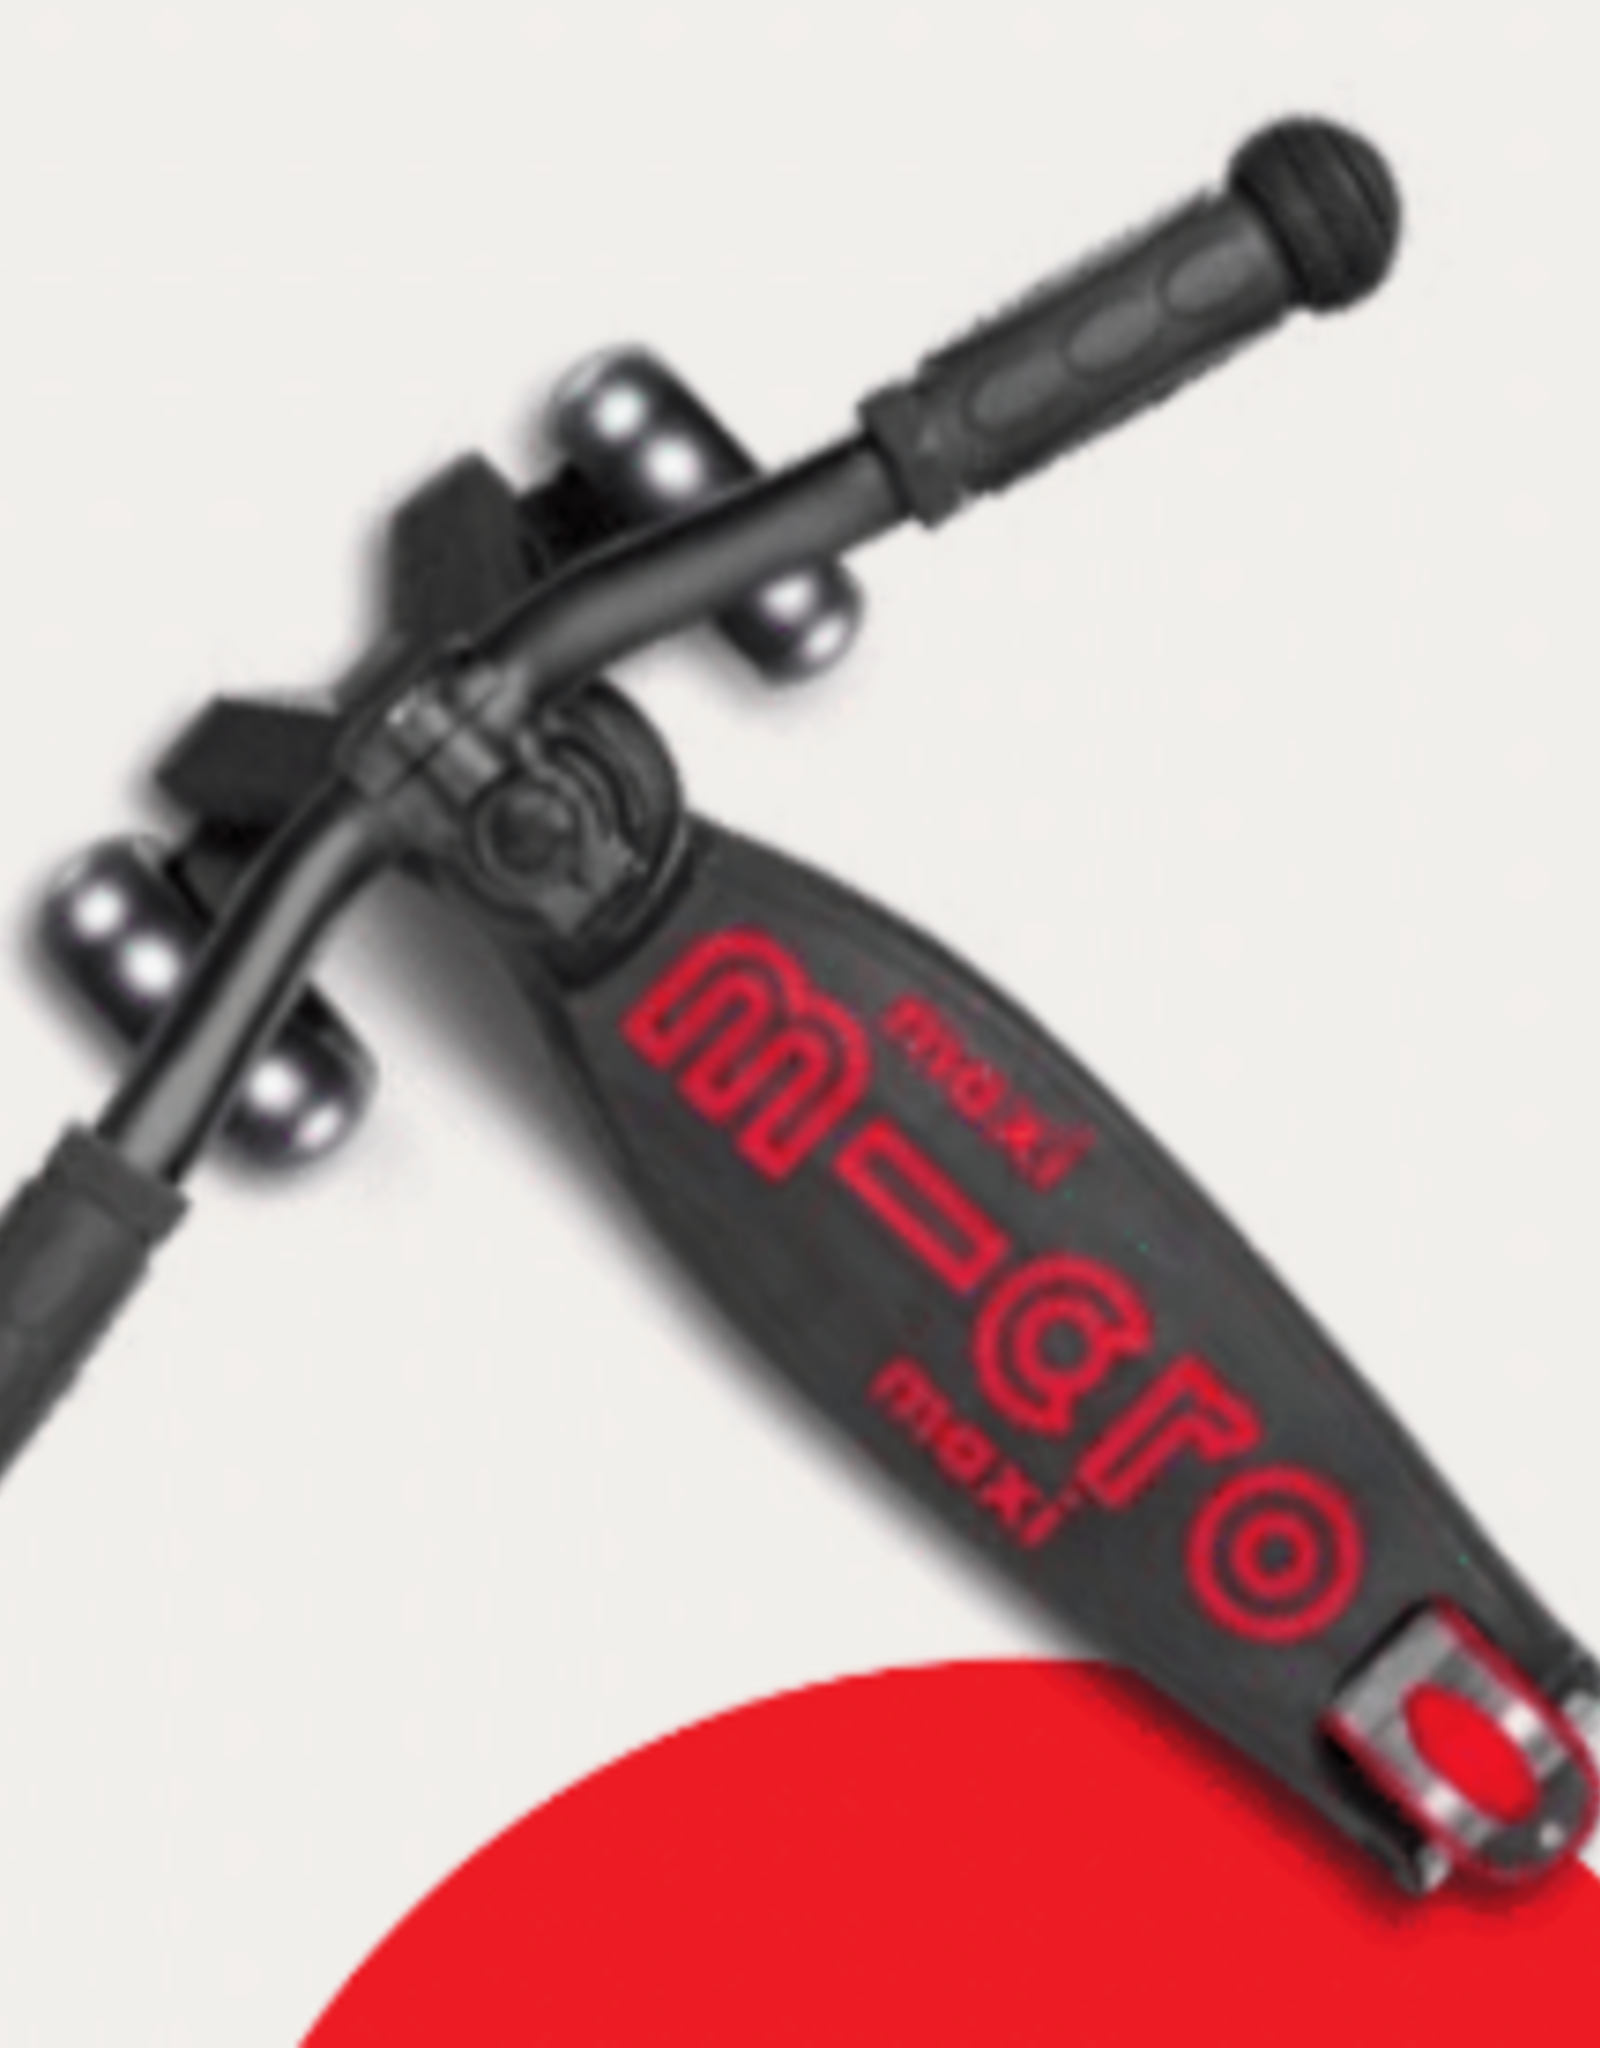 MICROSCOOTER BLACK RED PRO LED MAXI